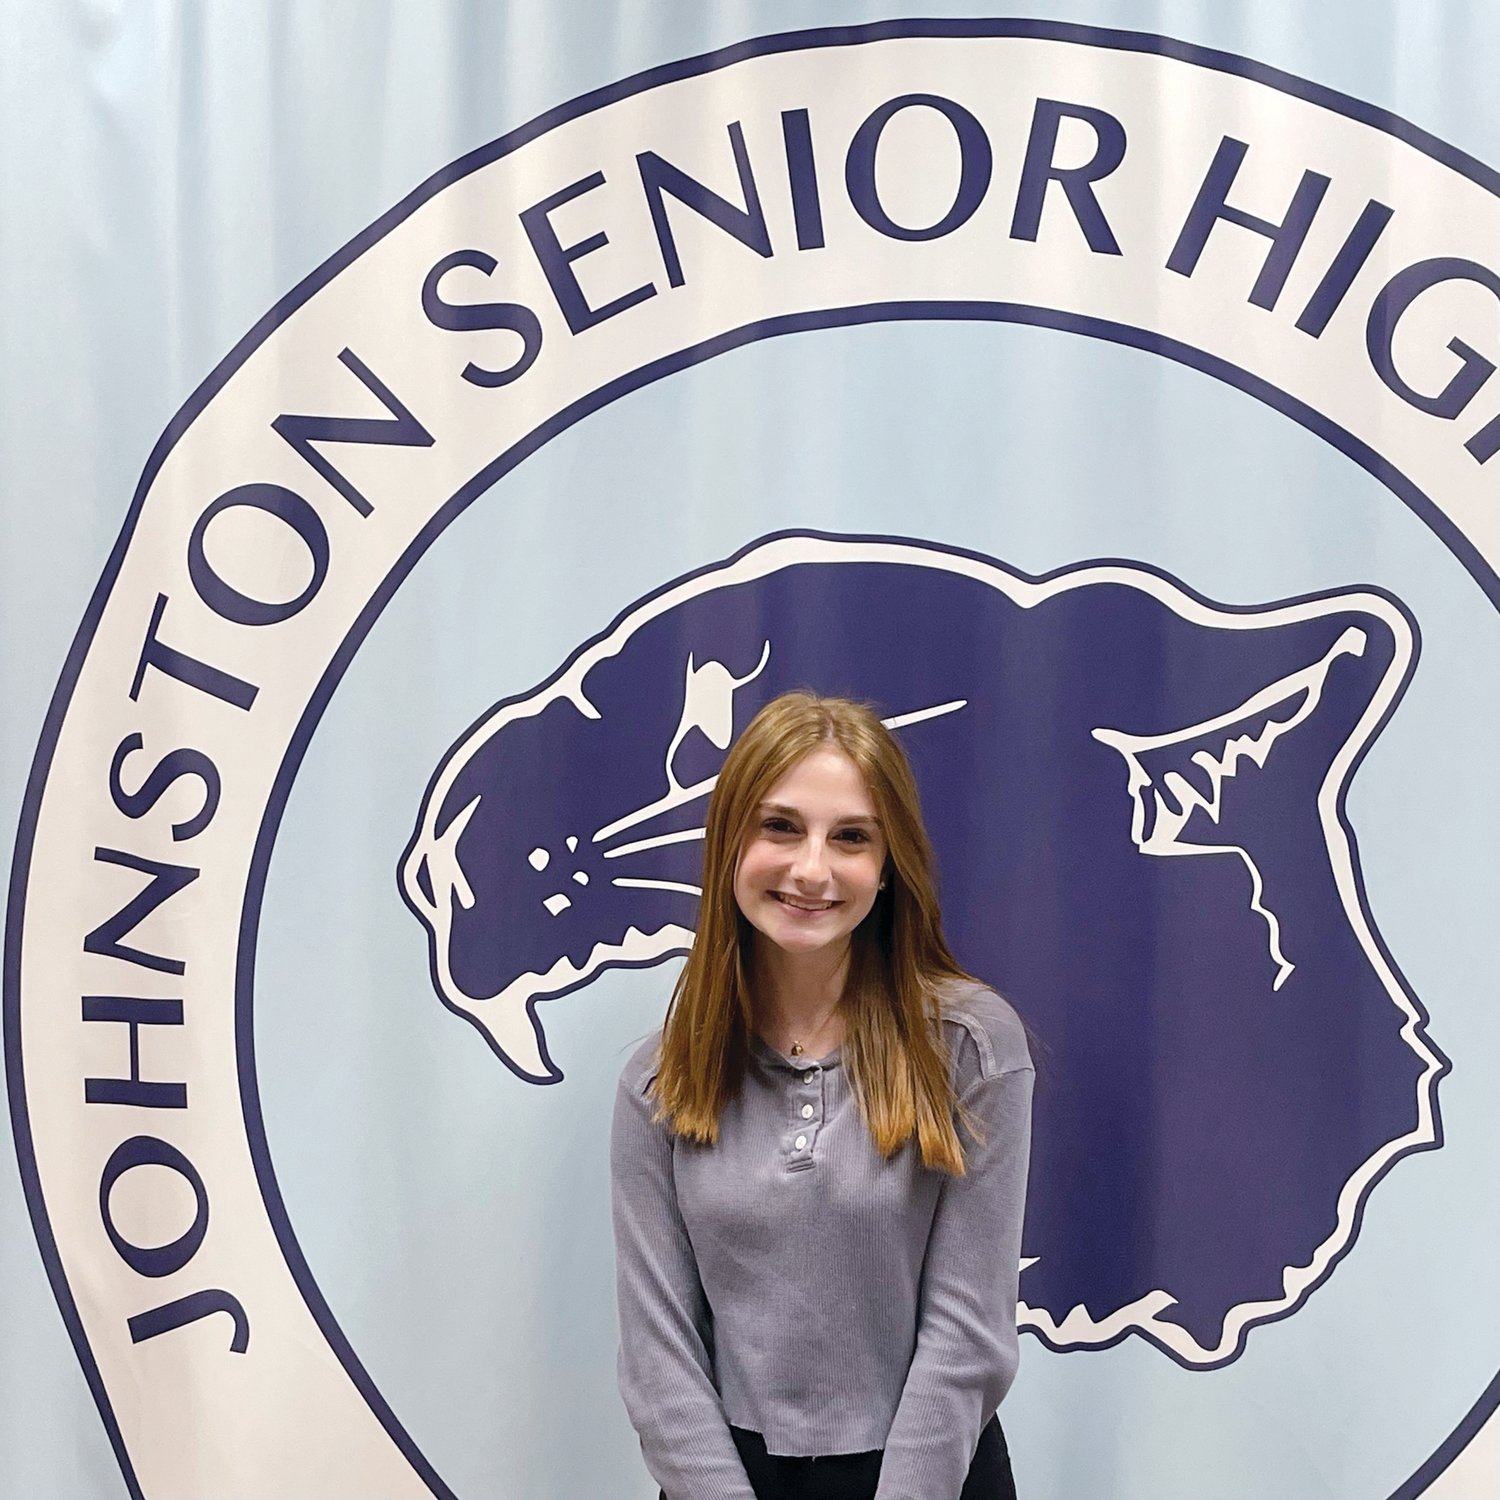 POTW: The Jan. 12, 2023, Panther of the Week is Katelyn Loffler. Kately was nominated by Mr. Ed Saravo. Mr. Saravo said that "Katelyn shows up to class every day ready to work, and has shown continuous improvement throughout the year, on already very good work." As well as doing great in Biology, Katelyn is also a 1st Honors student and the Class of 2025 Secretary. Aside from Student Council, she is also involved in Yearbook Club and Select Choir, while being a member of Music Honor Society.